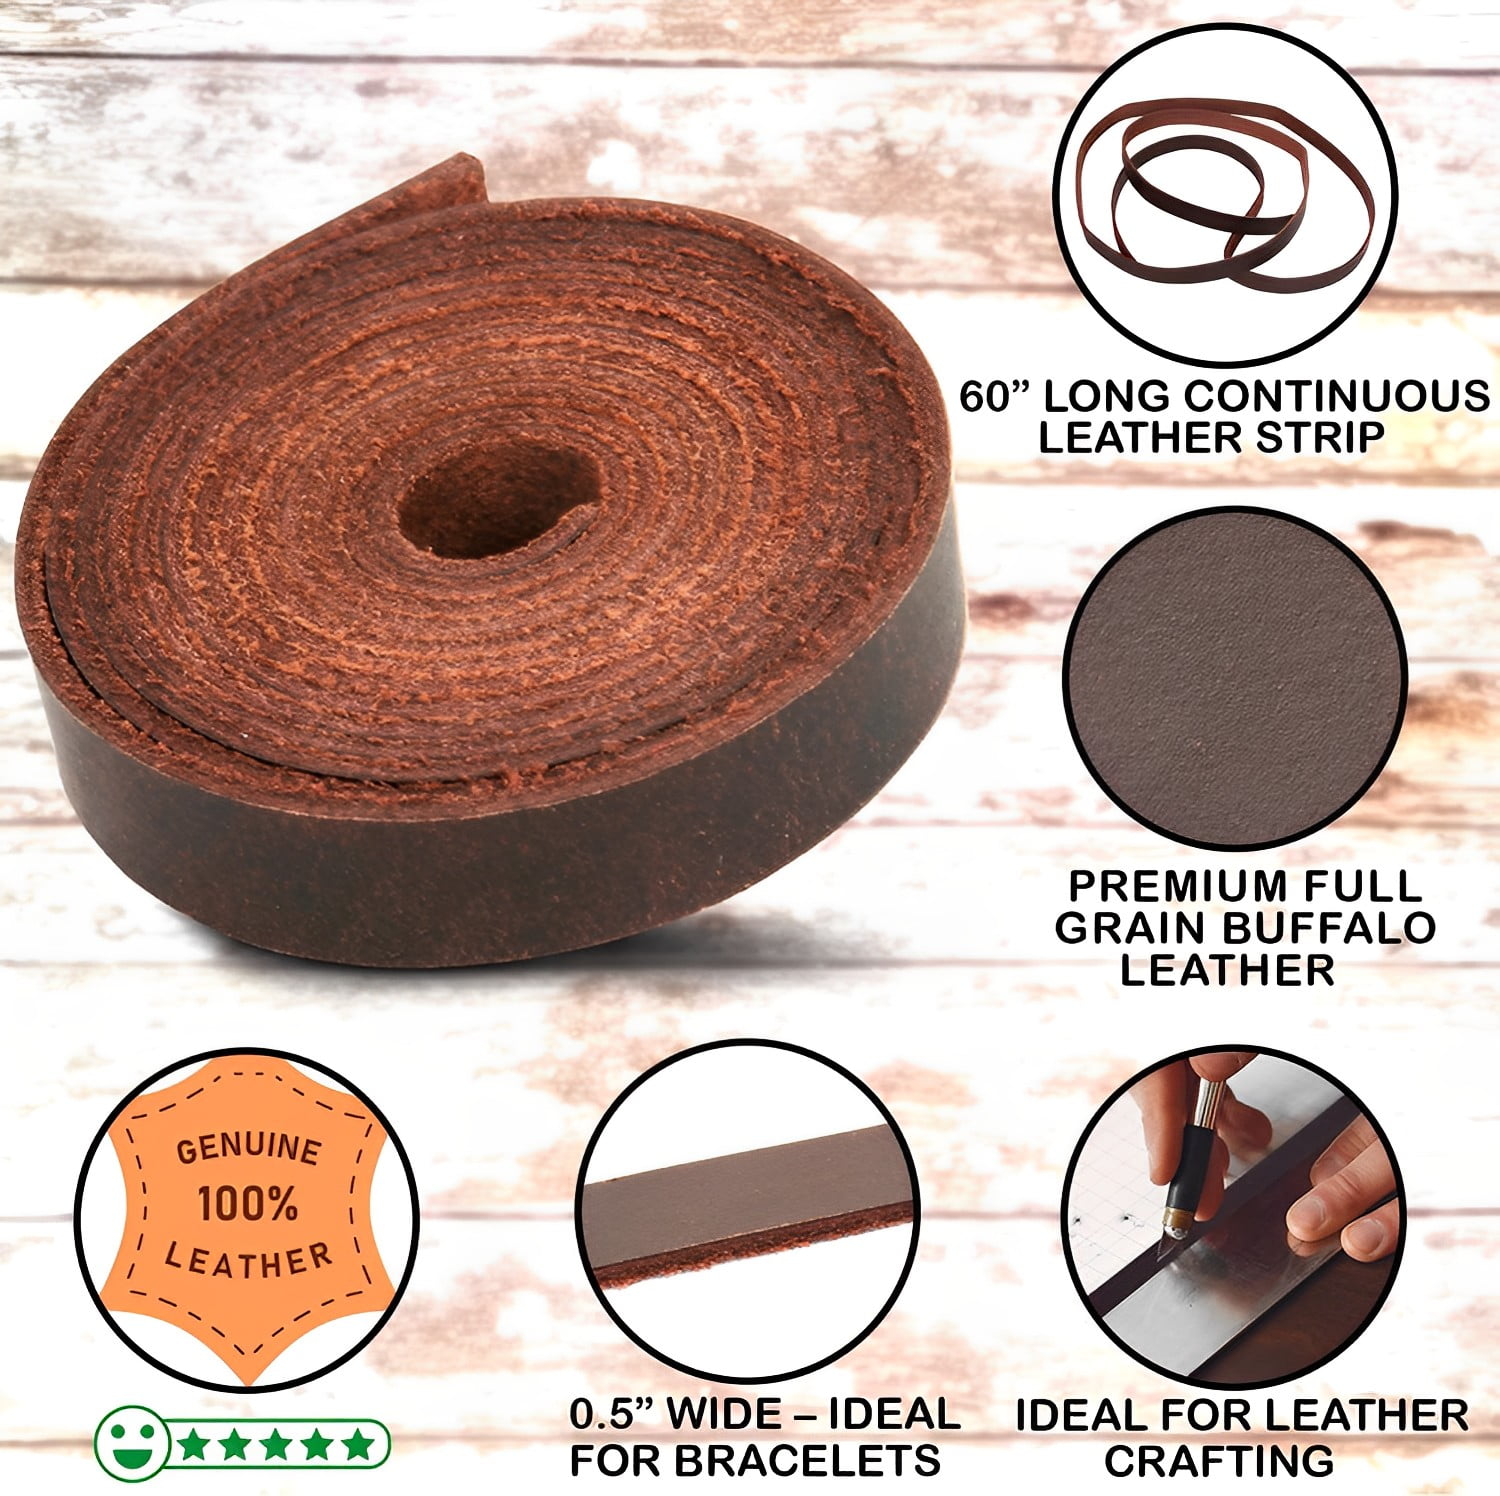 RAWHYD Full Grain Buffalo Leather Strip, Fine Brown Leather Straps Ideal  for Crafts DIY Belts, Bracelets, Jewelry, Key Chains and More (1.5 x 60)